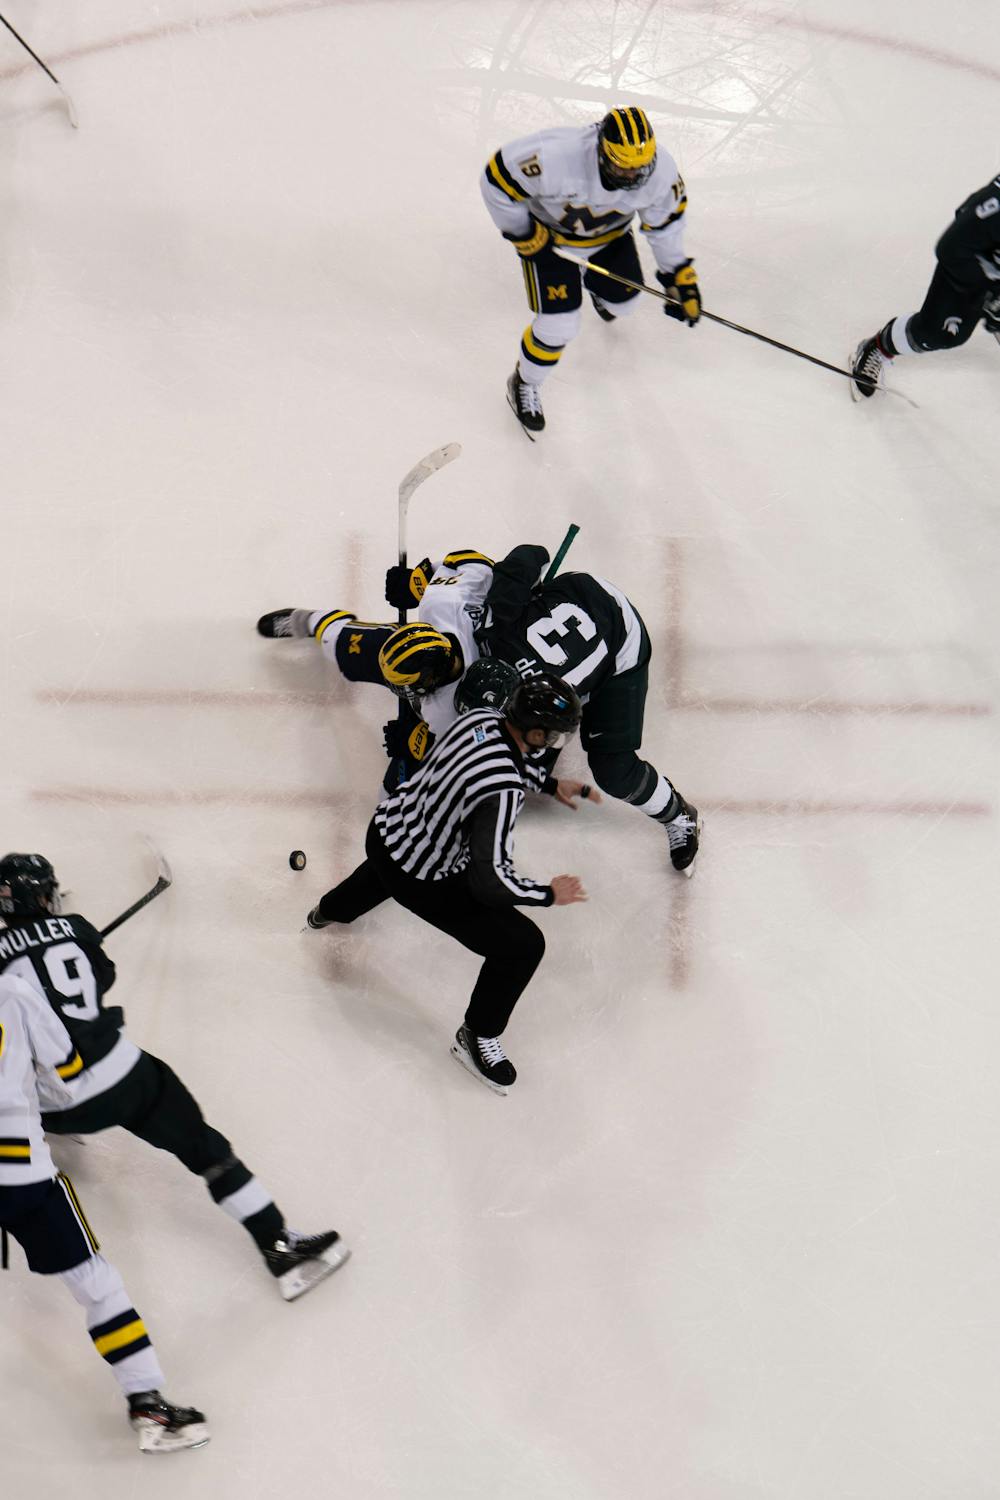 <p>Sophomore center Kristoff Papp (13) faces off against a University of Michigan player. MSU Hockey fell to the University of Michigan, 4-1, in the first game of the Big Ten Men&#x27;s Hockey Tournament at the Yost Ice Arena on March 04, 2022.</p>